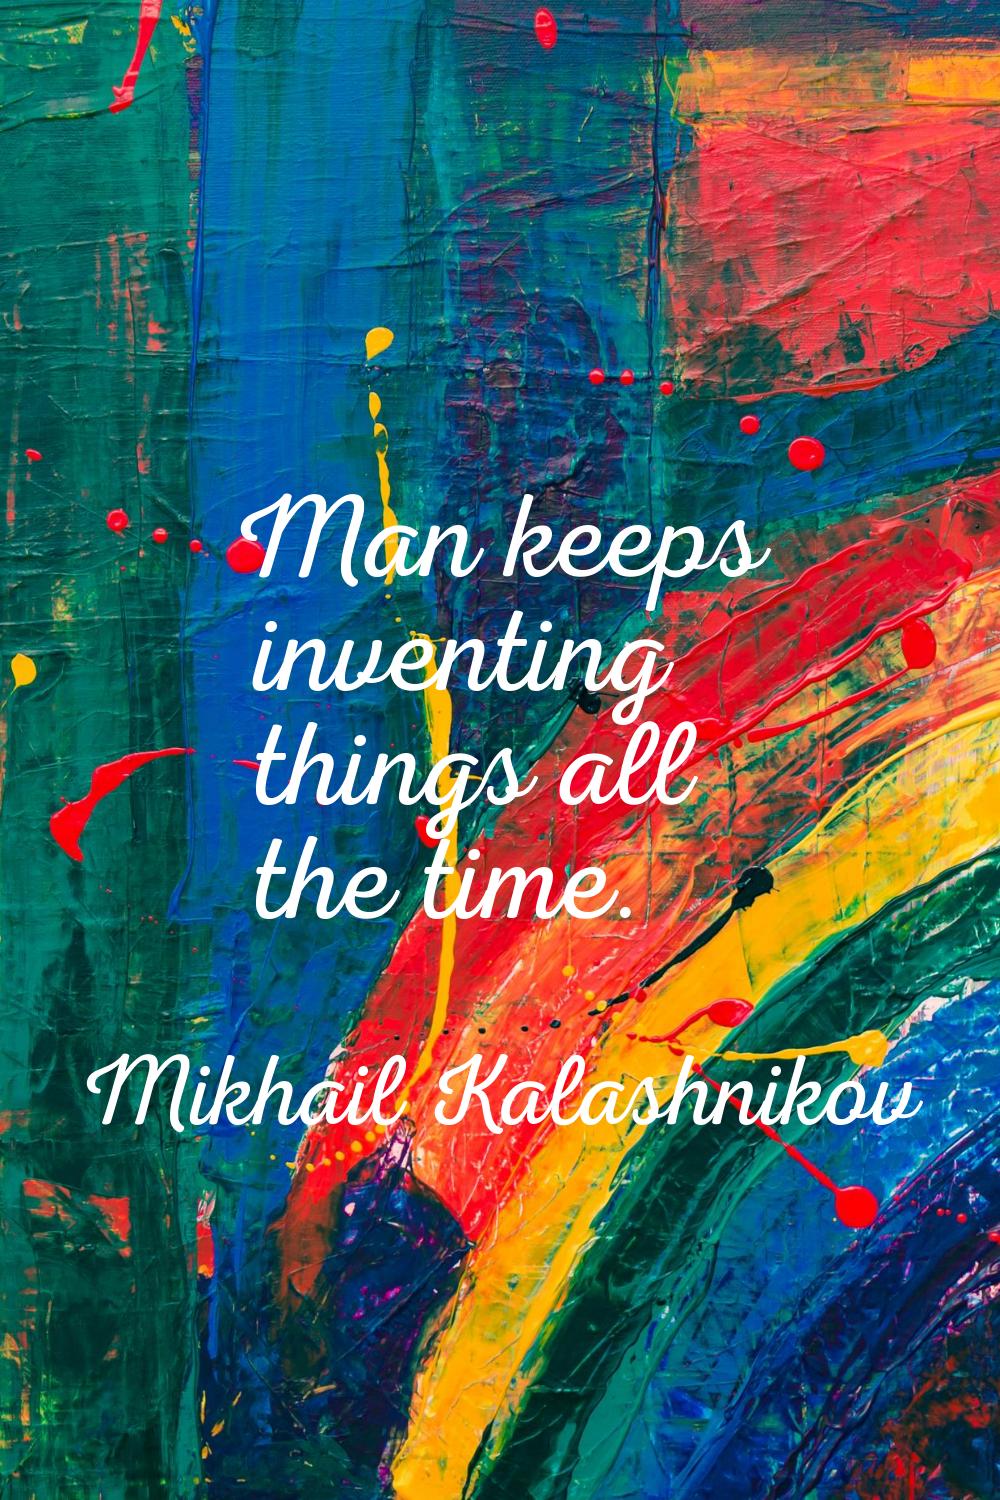 Man keeps inventing things all the time.